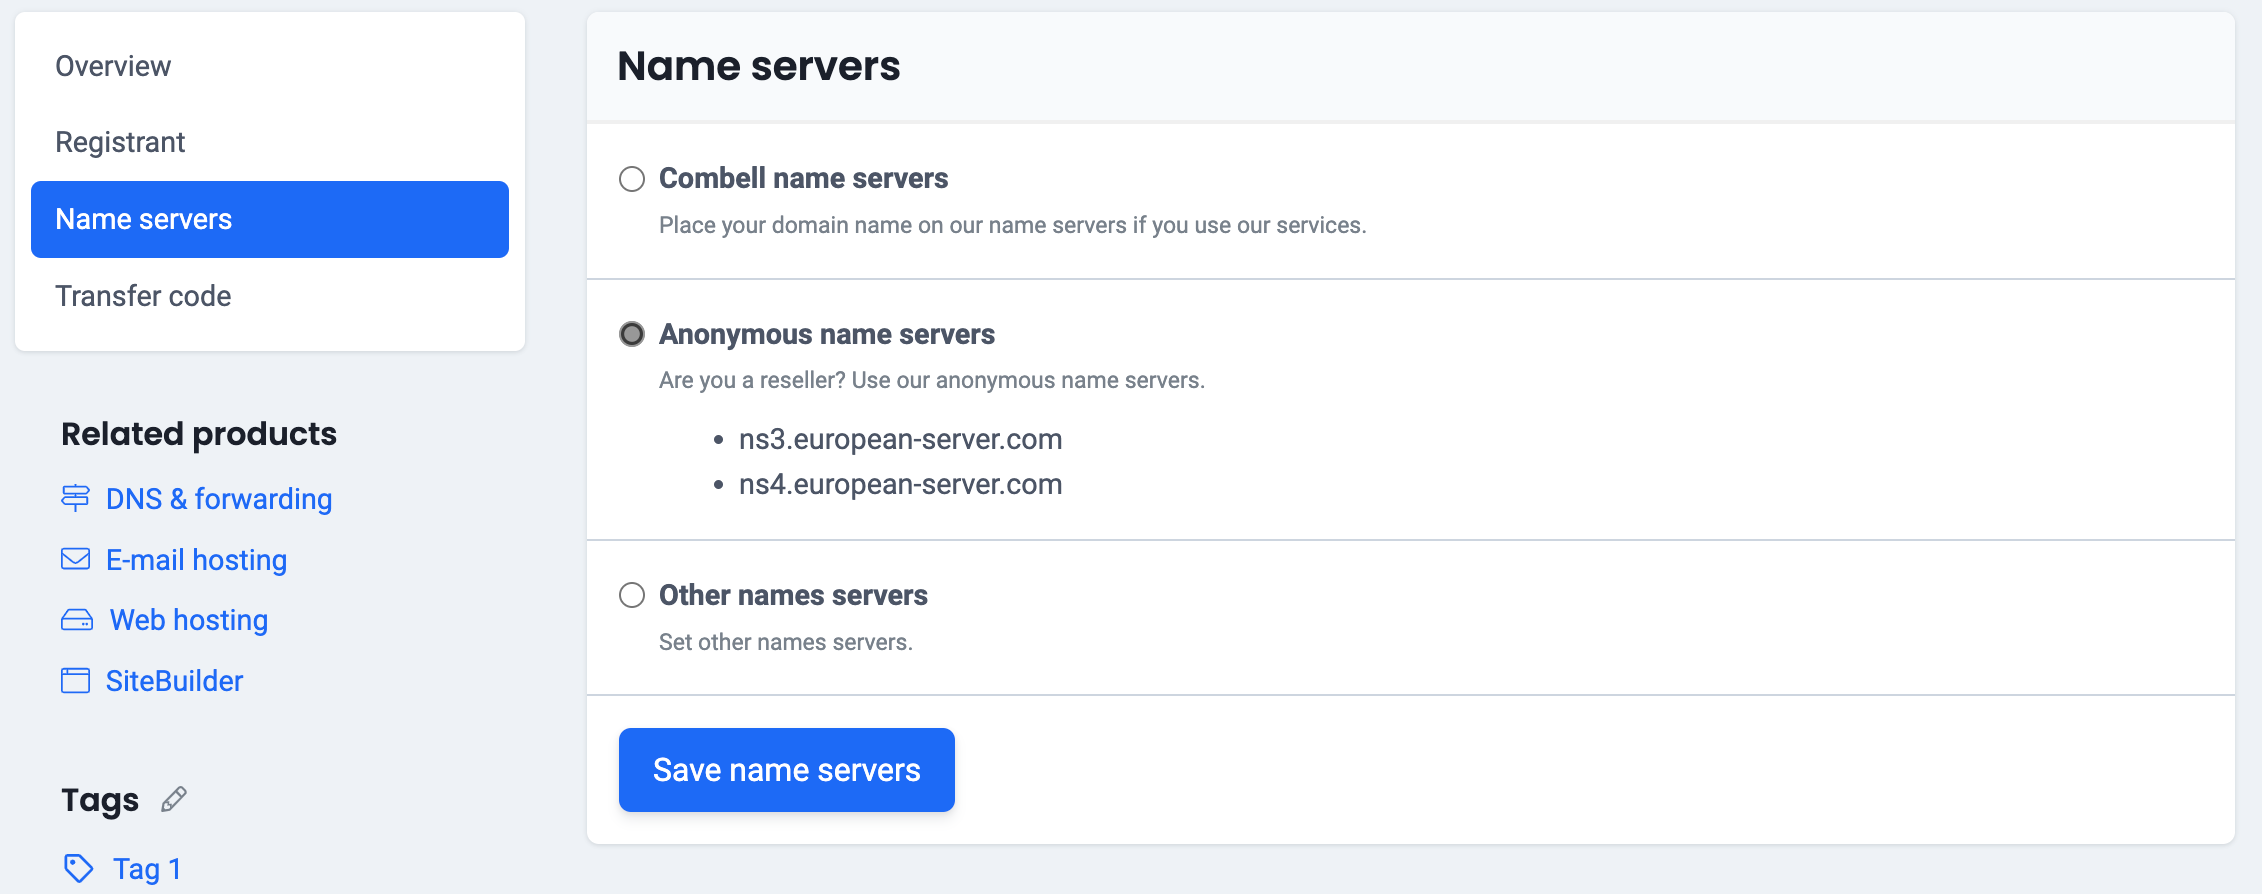 Choose "Combell name servers"